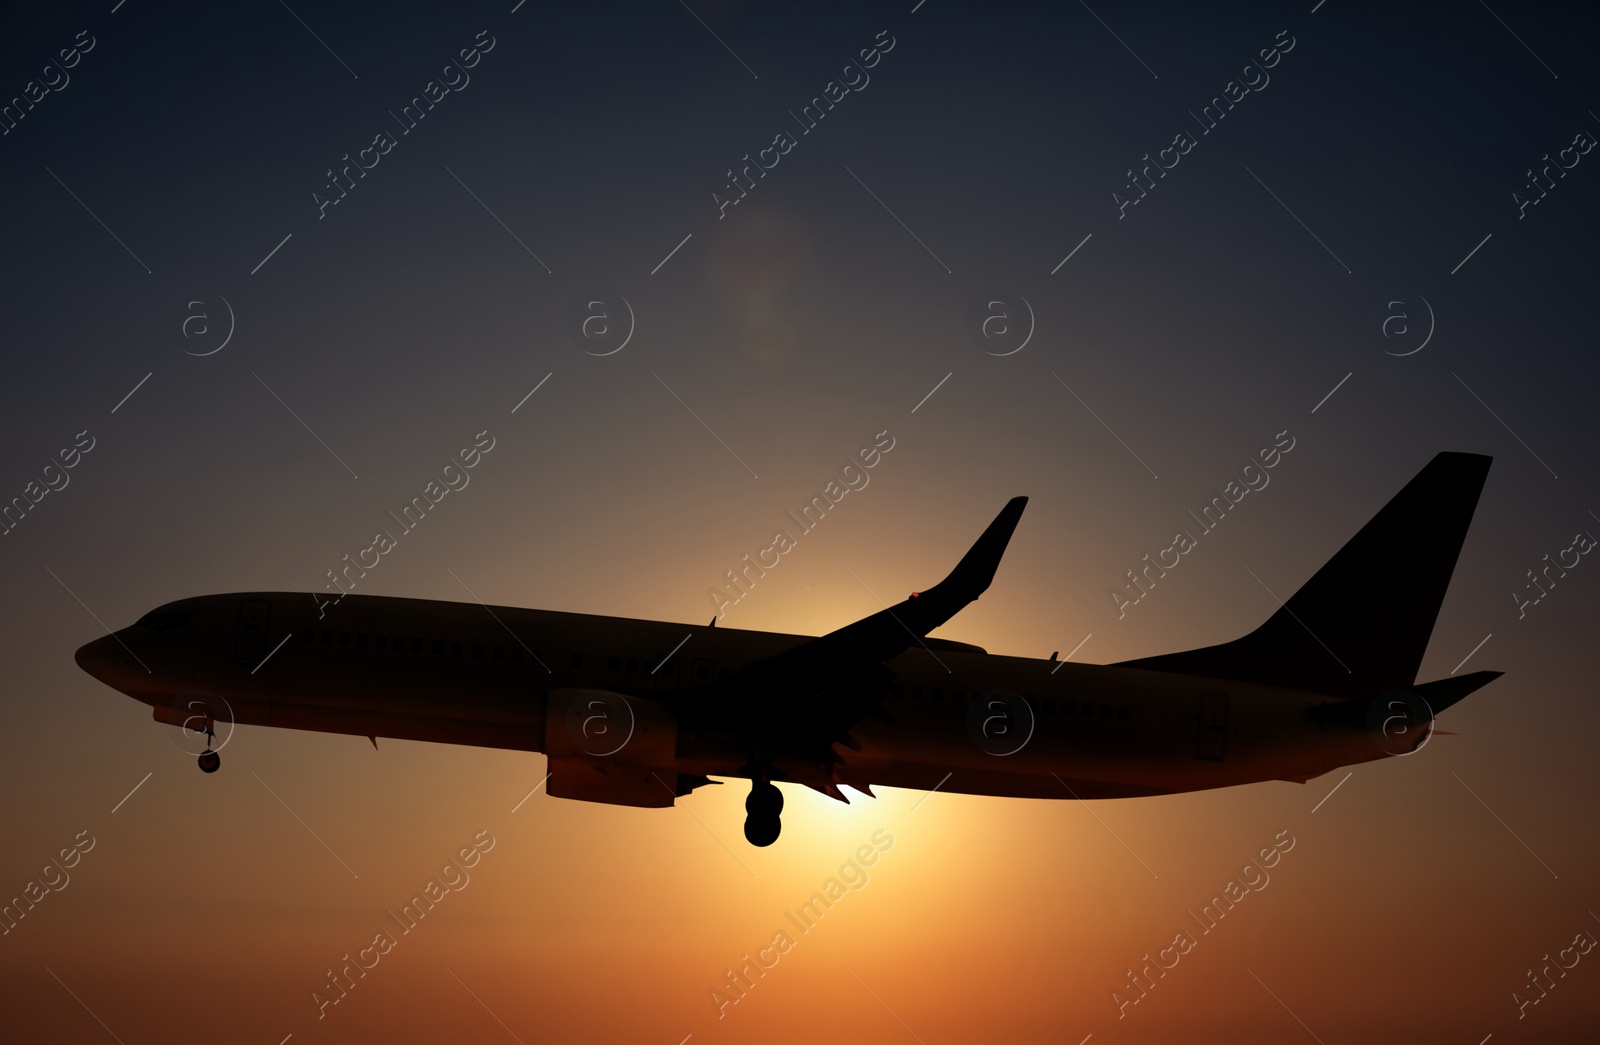 Image of Plane in sky against sun. Flight during sunset